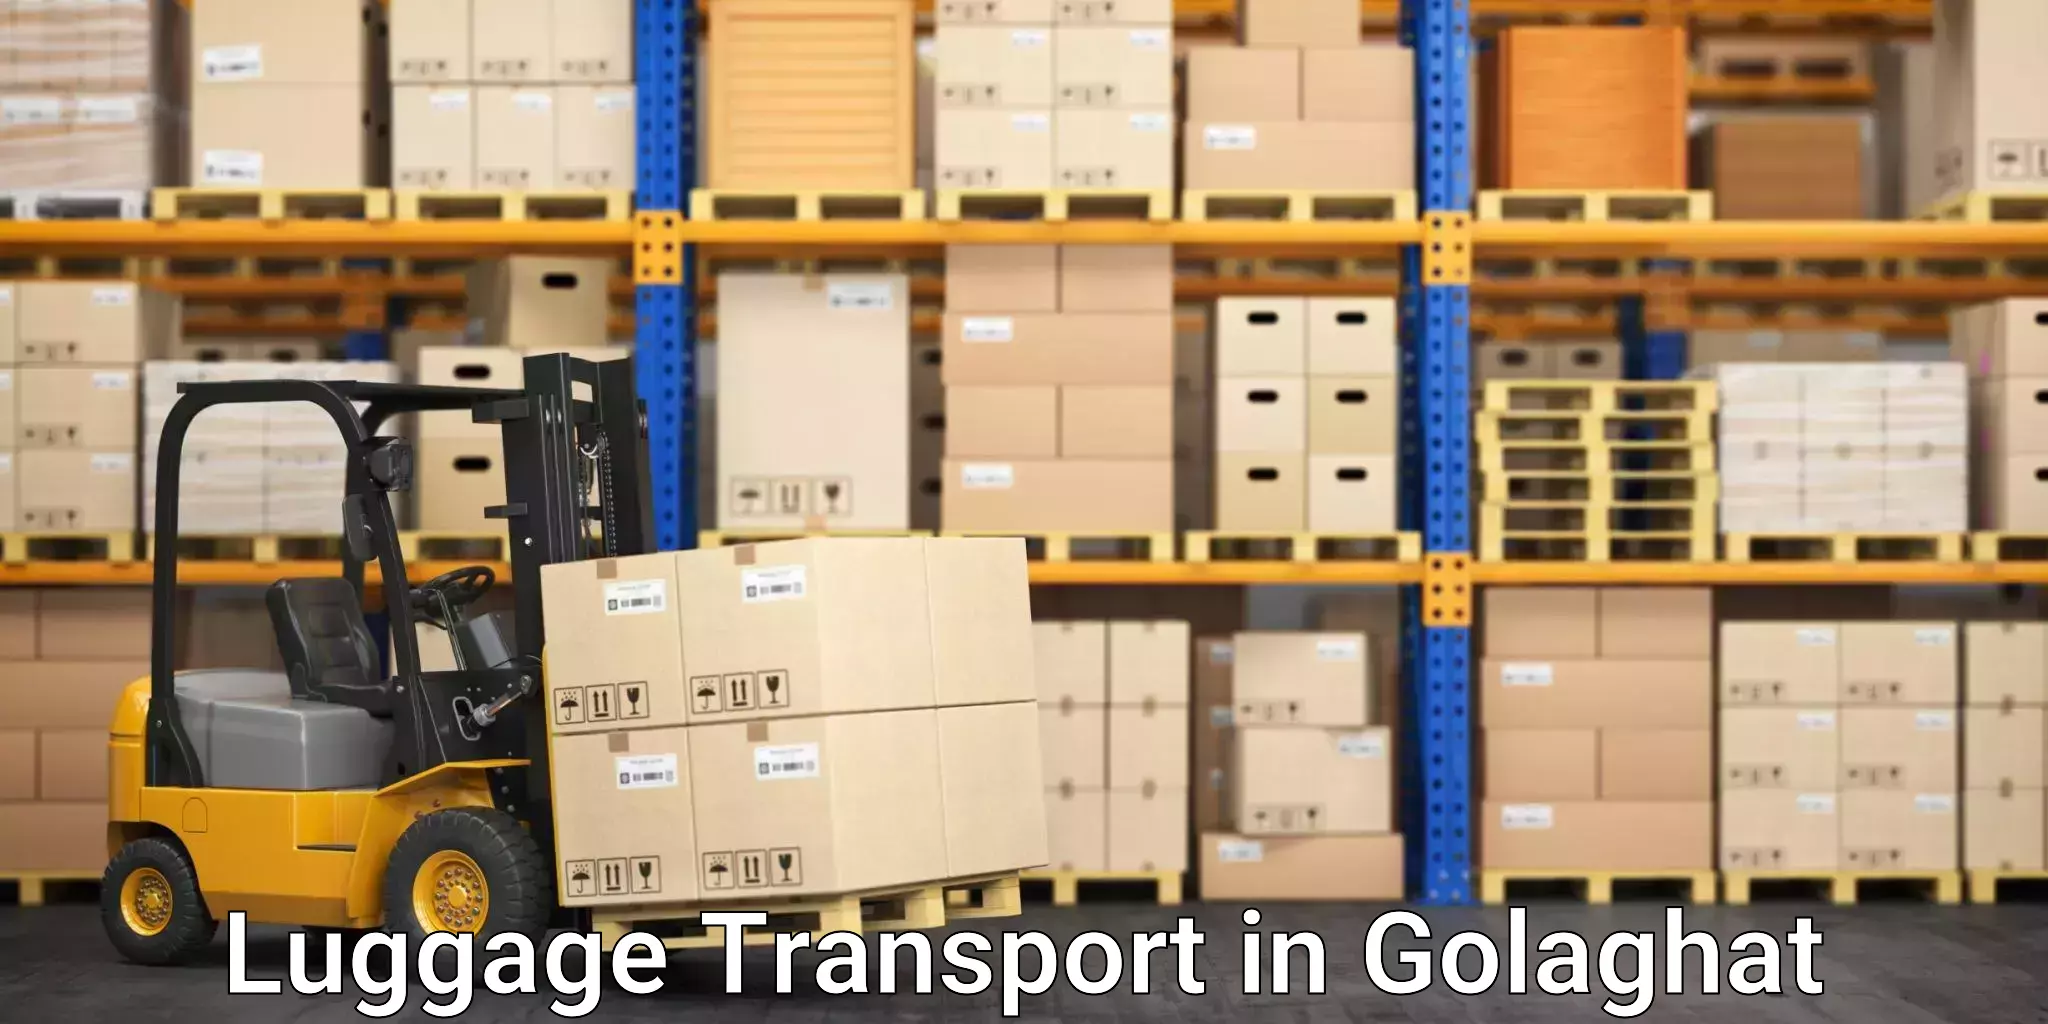 Global baggage shipping in Golaghat